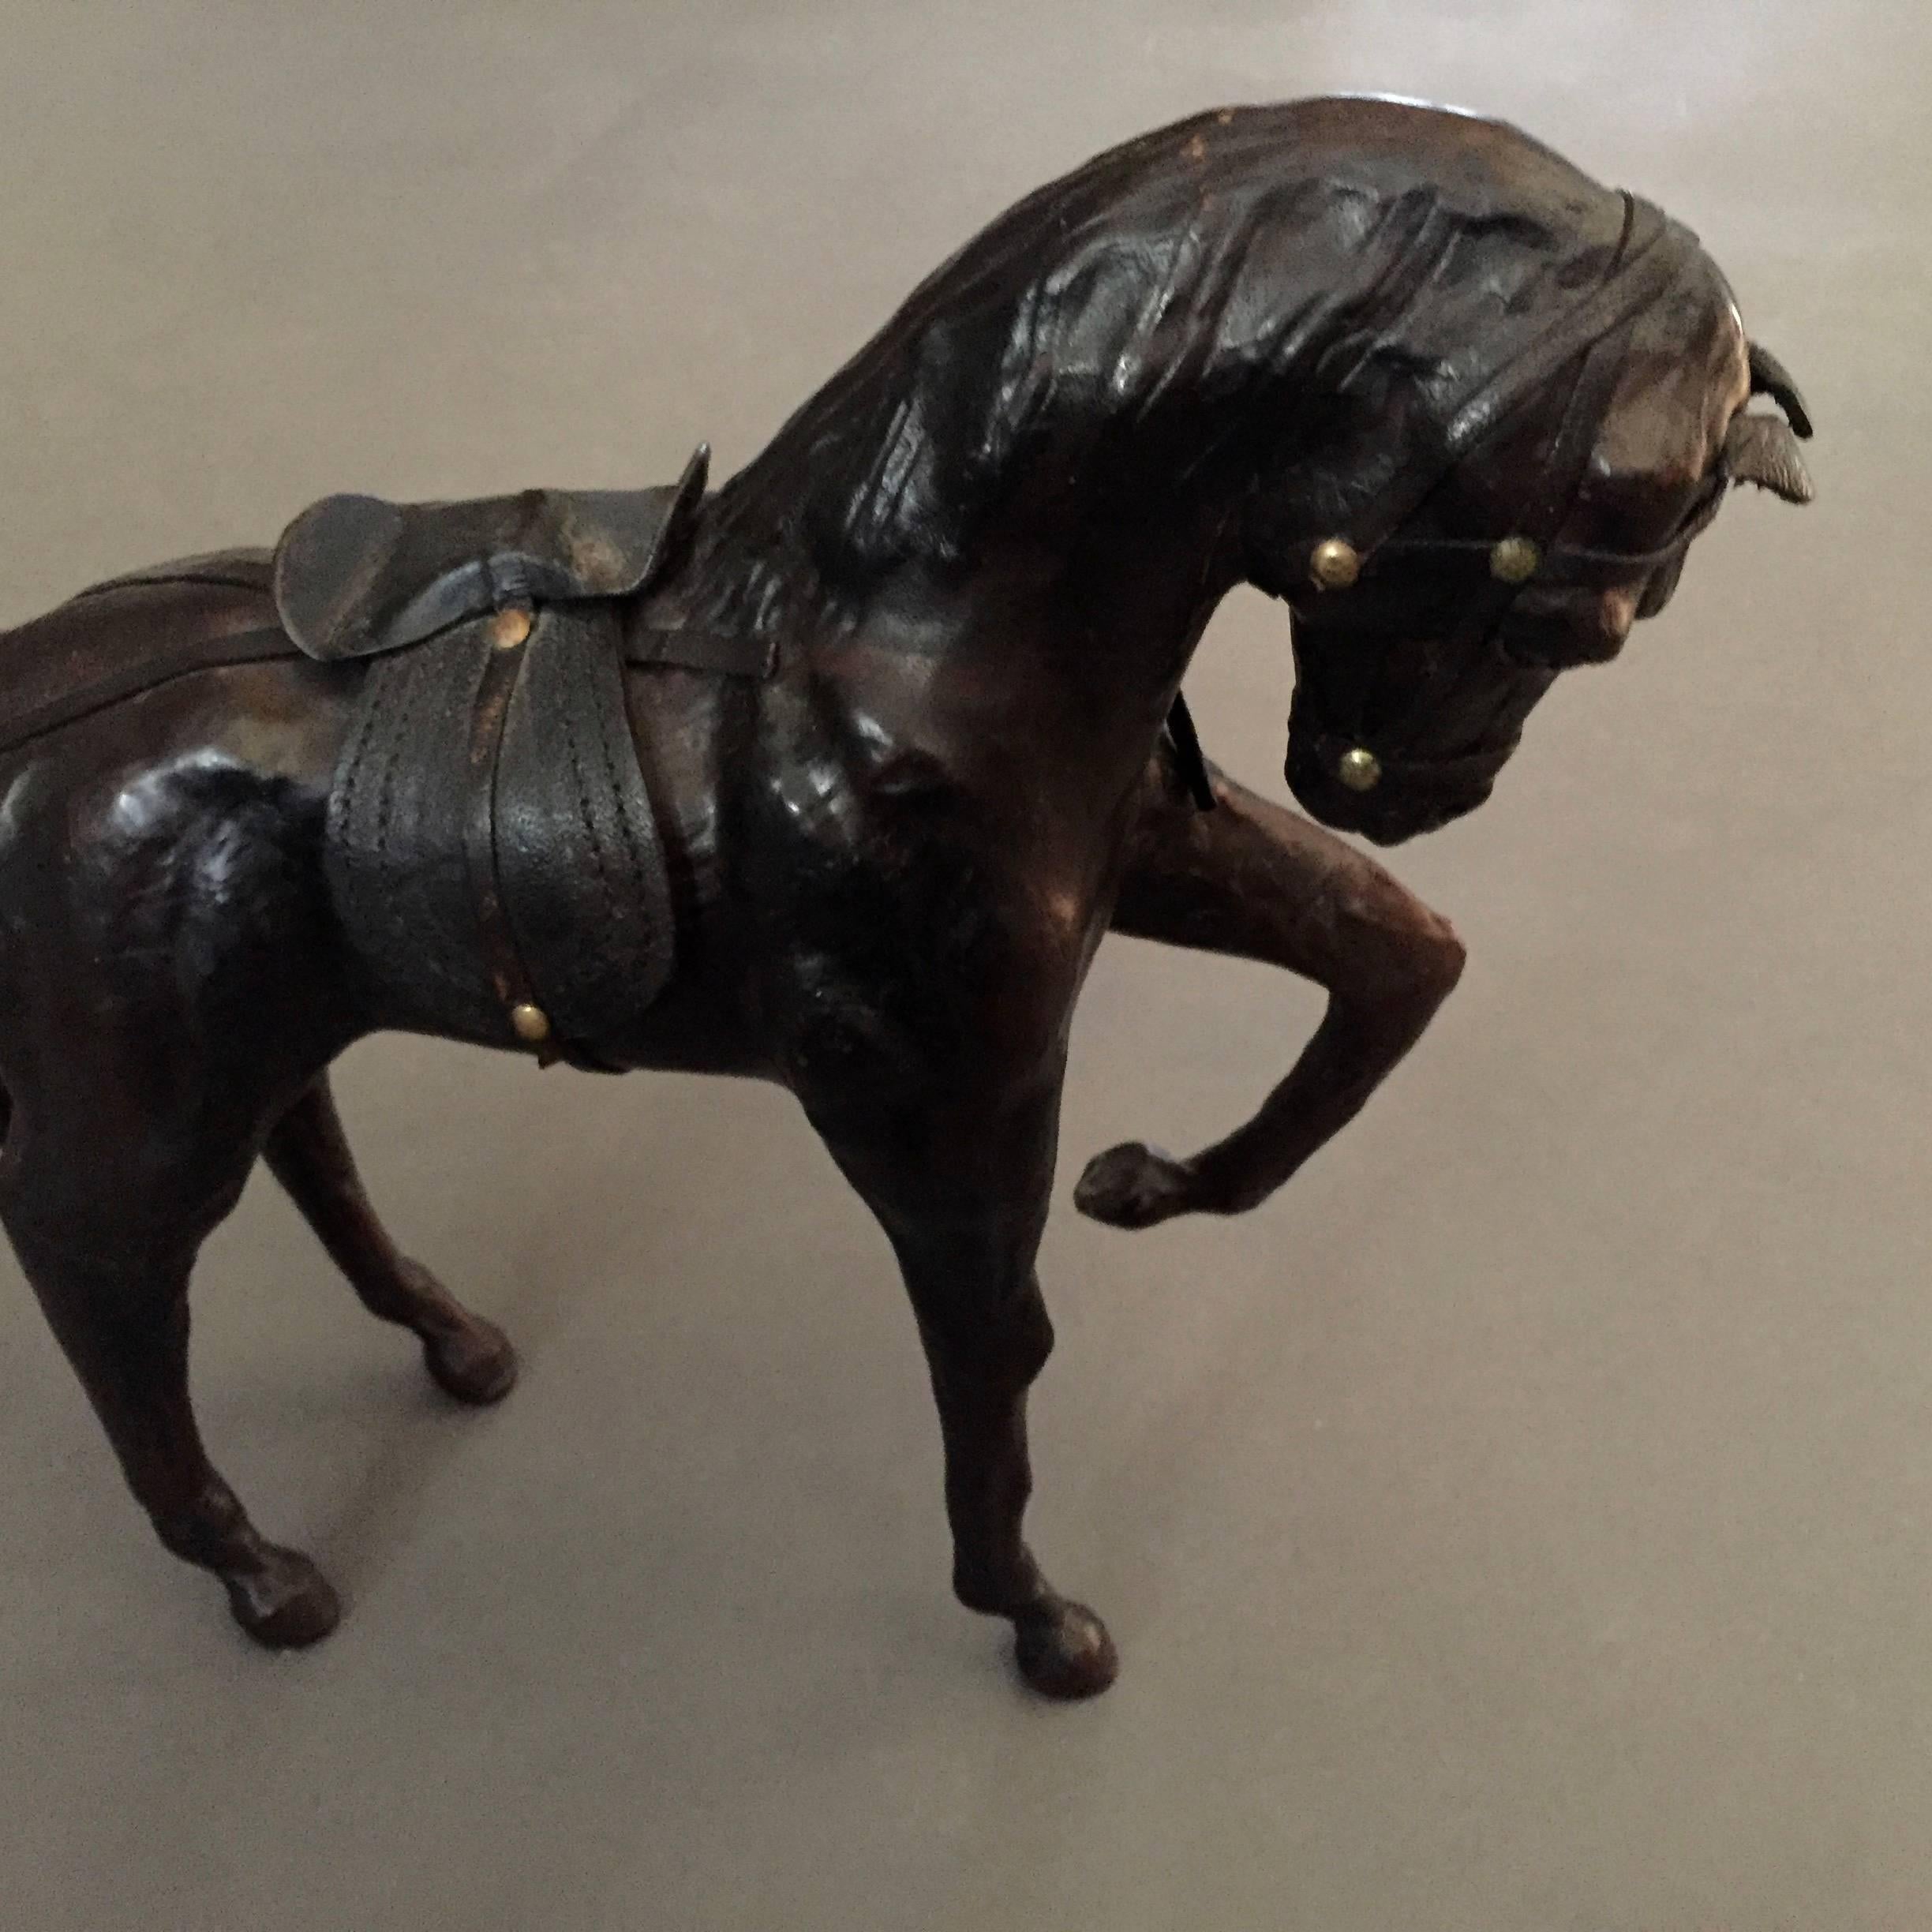 Originally designed to stand a four-wheeled trolly as a pull-toy at the turn of the century, these two full leather wrapped horse sculptures were likely produced around the 1940s and are both in terrific vintage condition, brown horse missing one